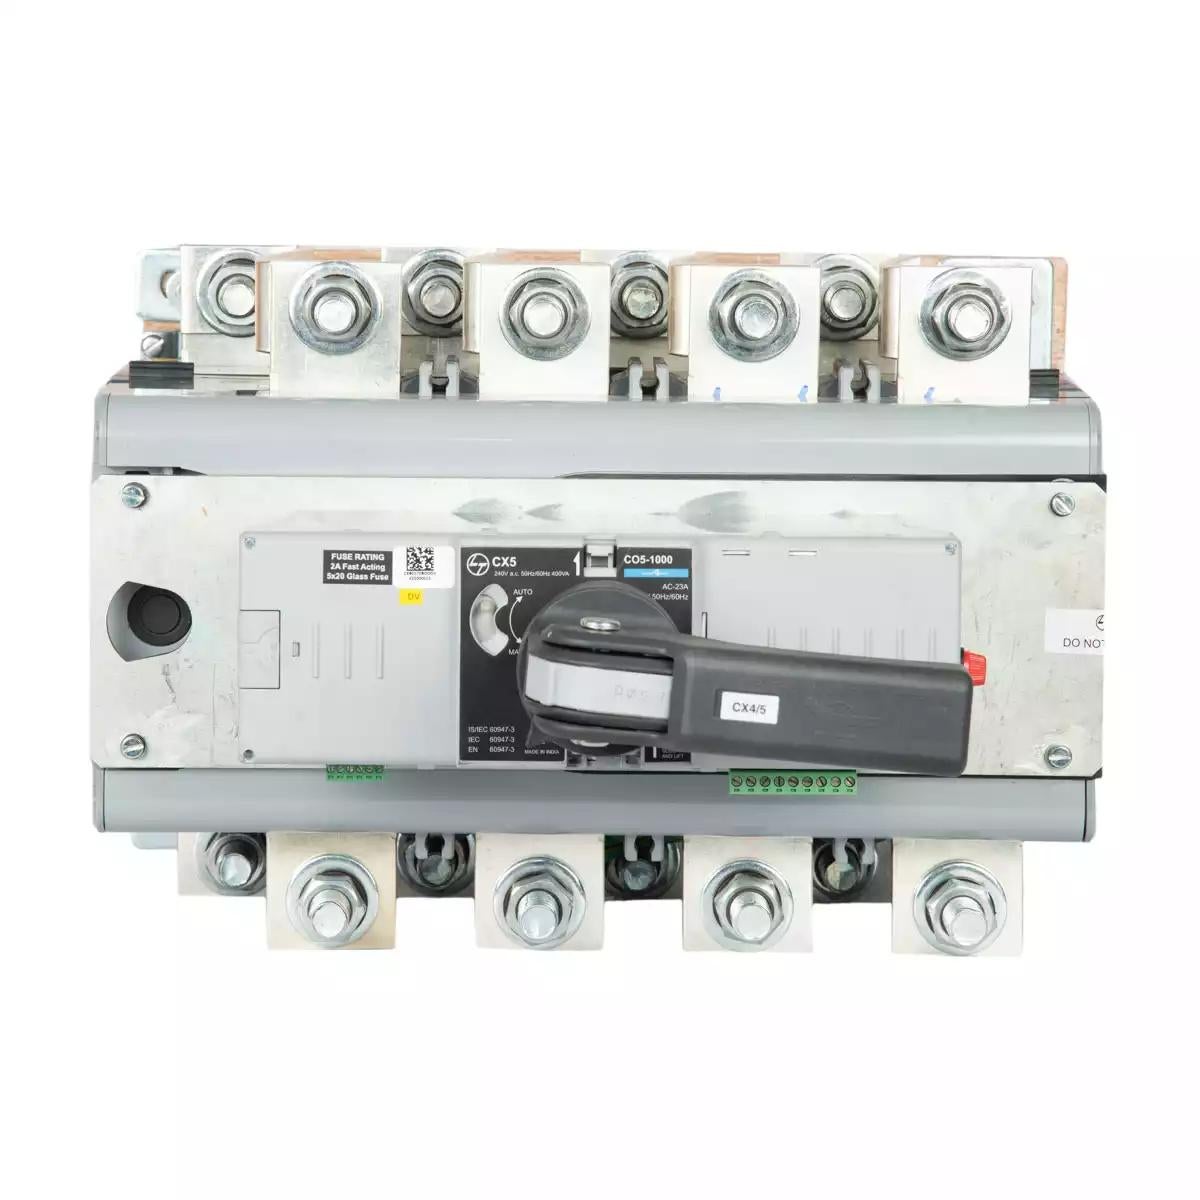 C-Line Motorised Changeover Switch FR5 800A 4P 415V AC Open Execution